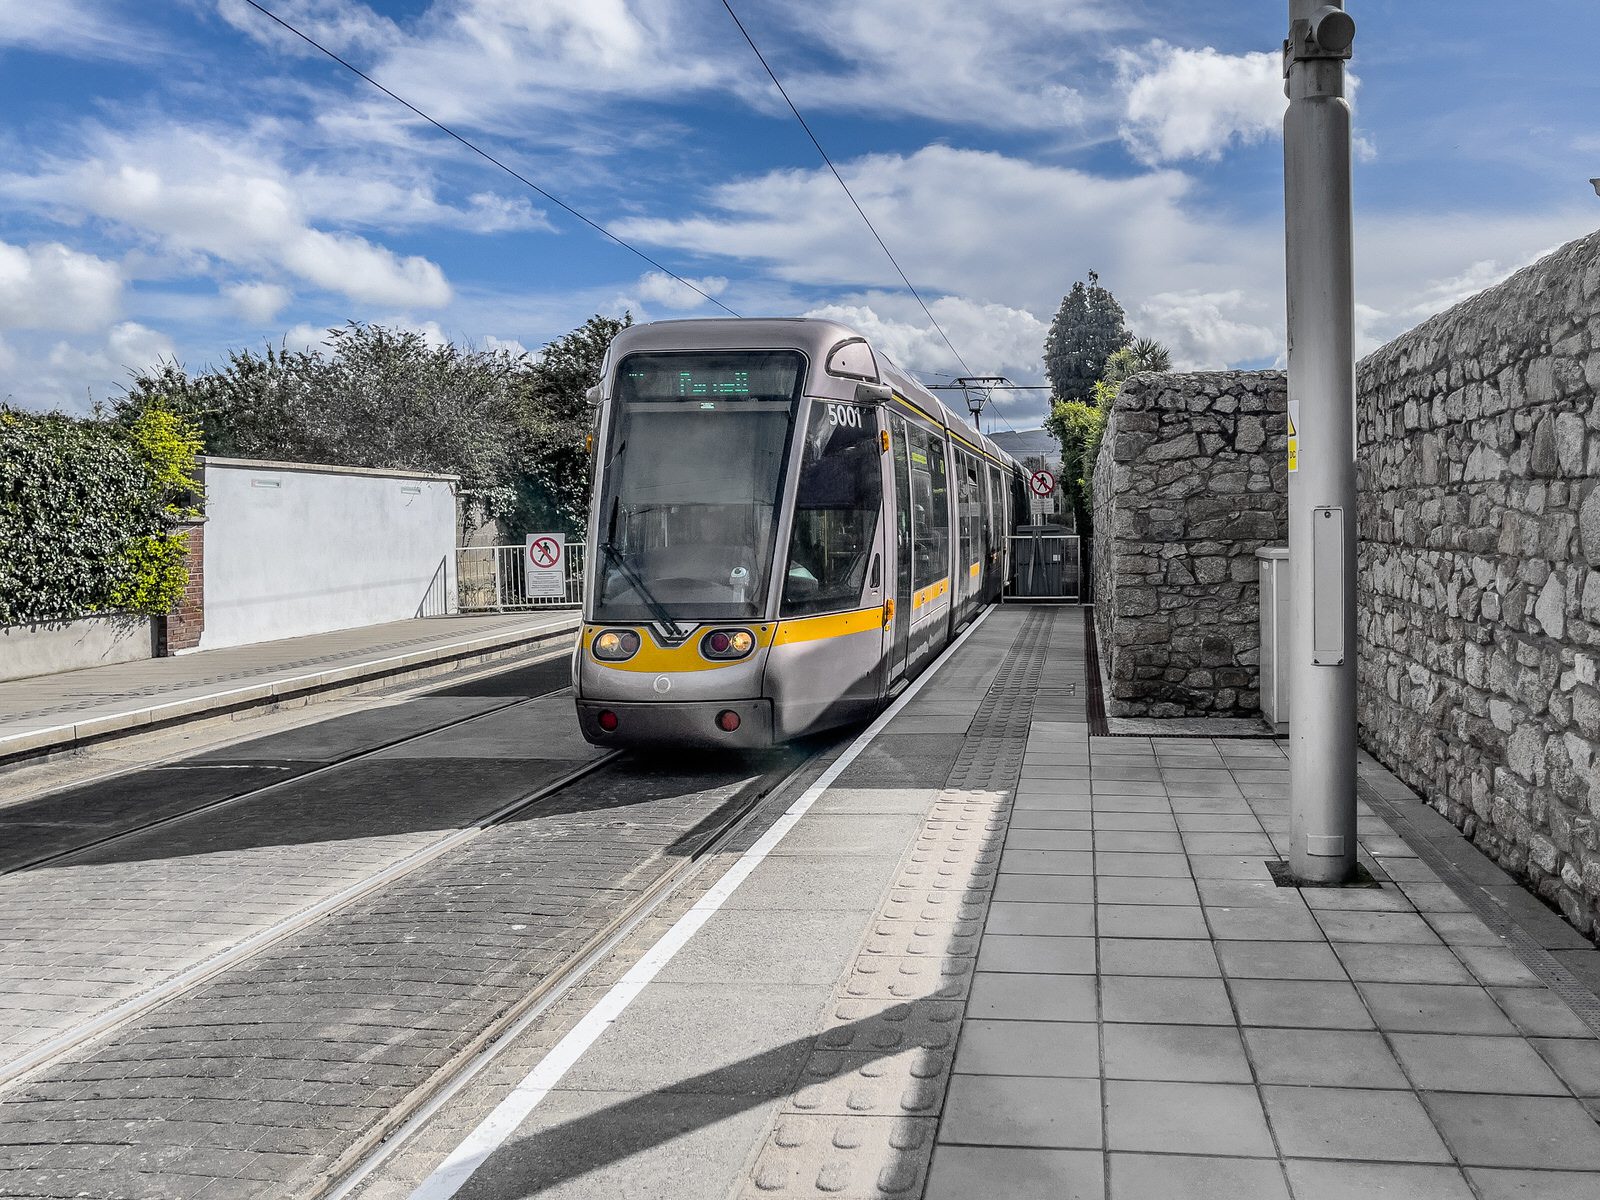 THE LUAS TRAM STOP AT WINDY ARBOUR AND THE IMMEDIATE AREA 042